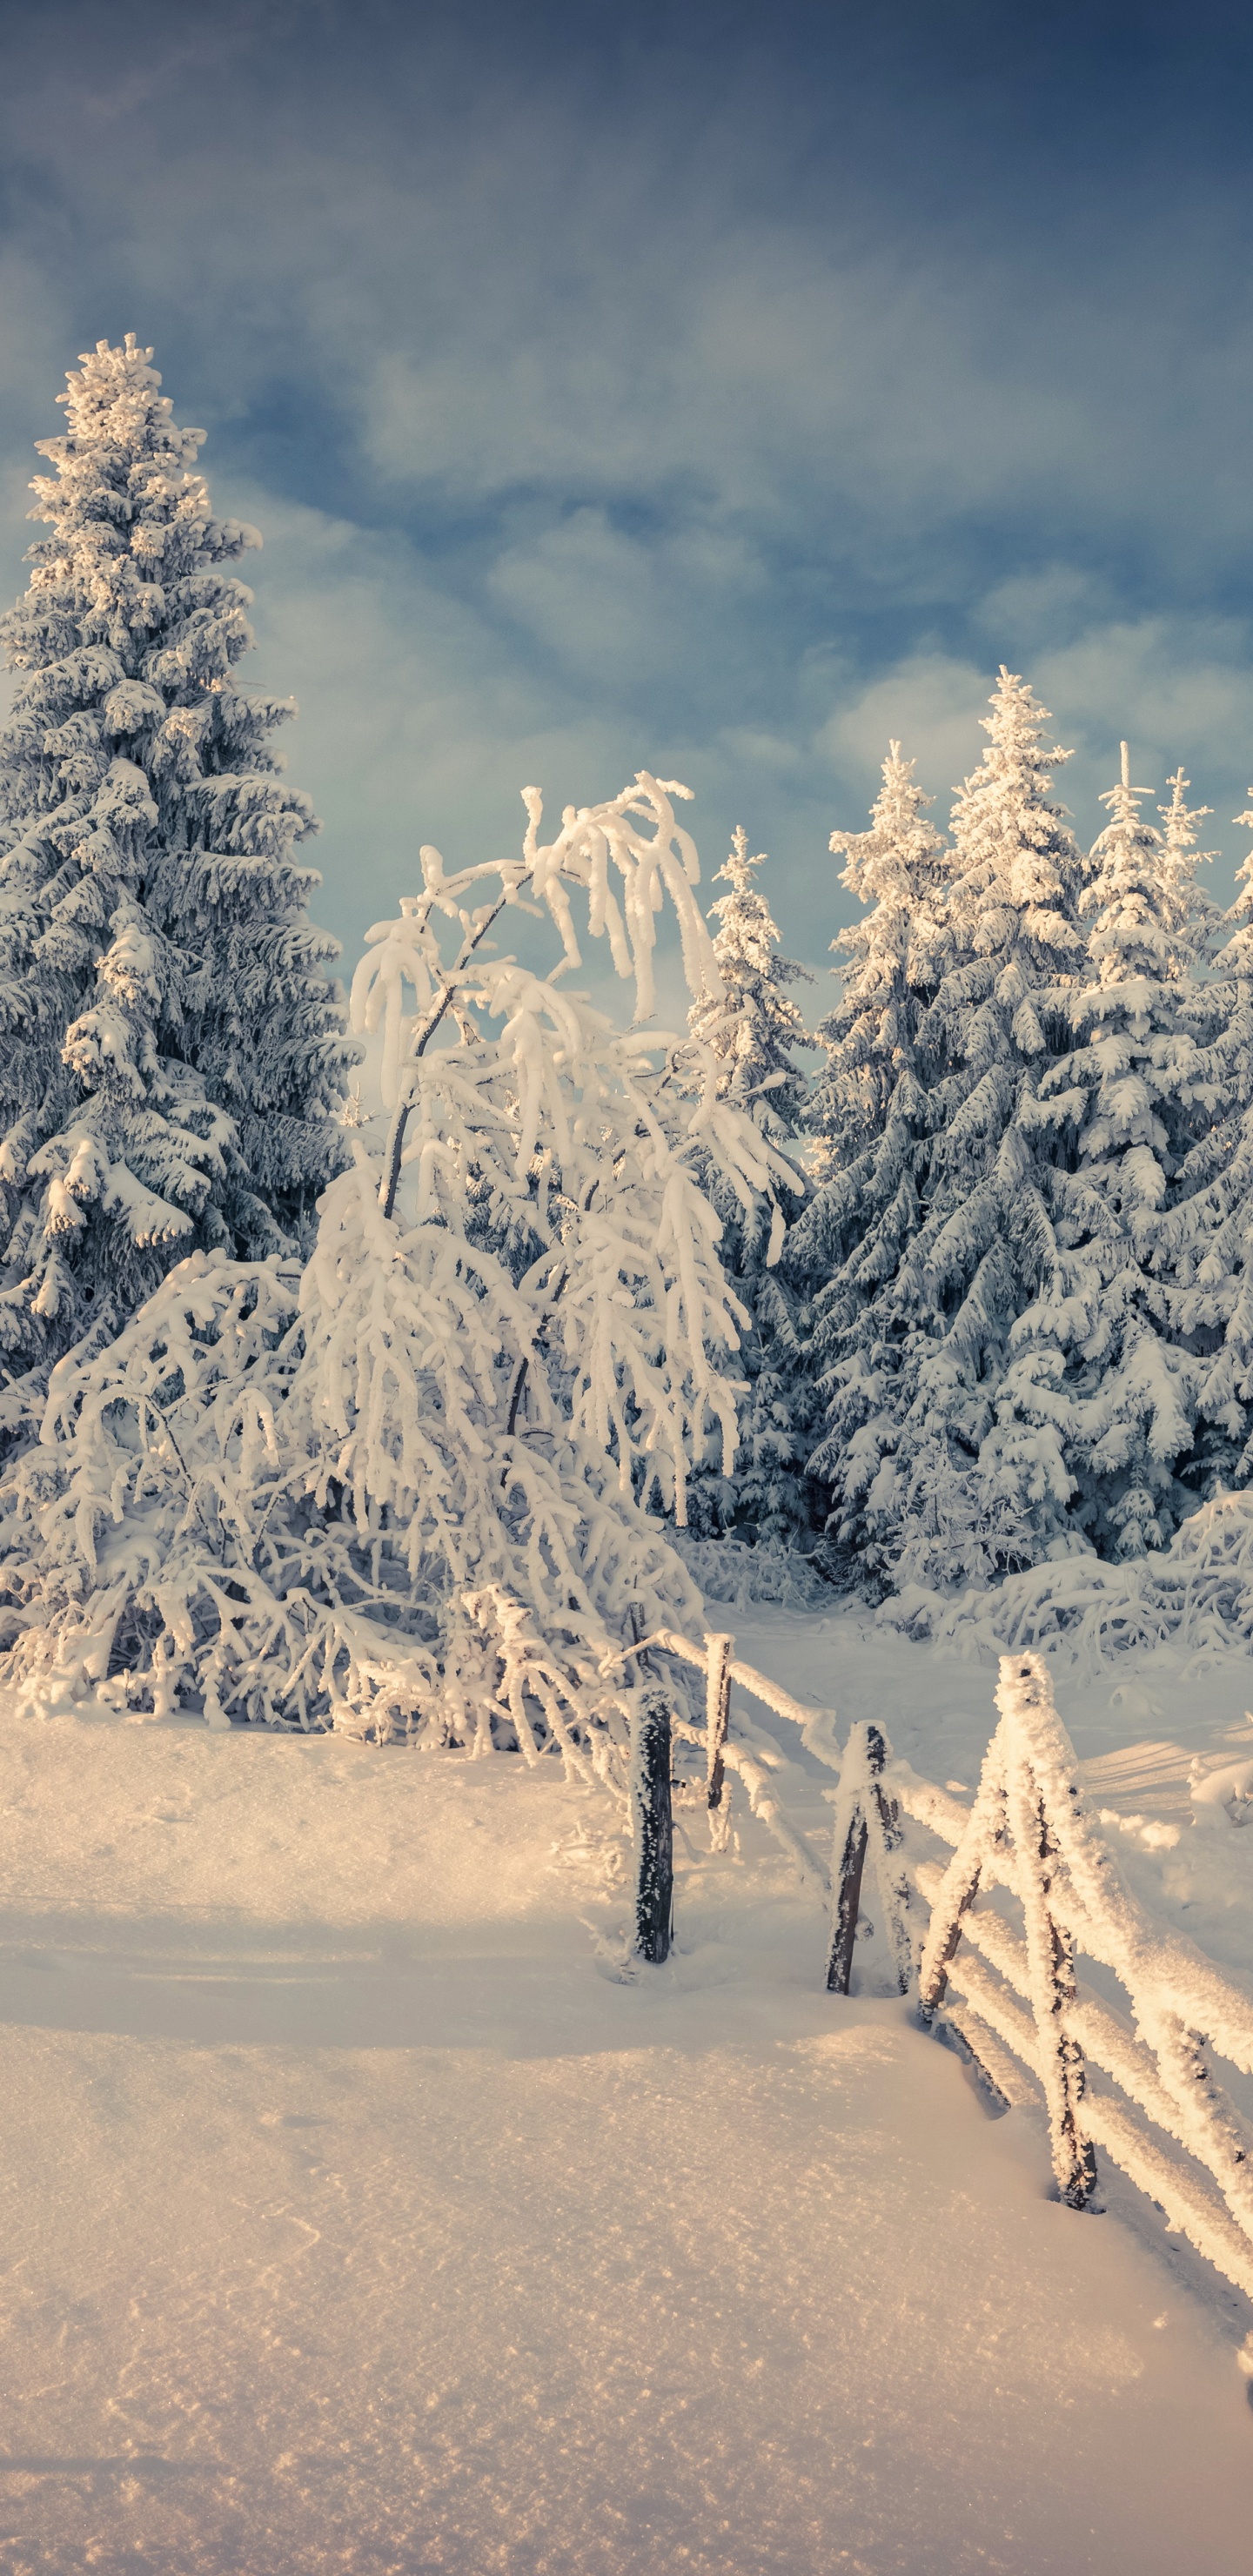 Snow Covered Trees and Mountains During Daytime. Wallpaper in 1440x2960 Resolution